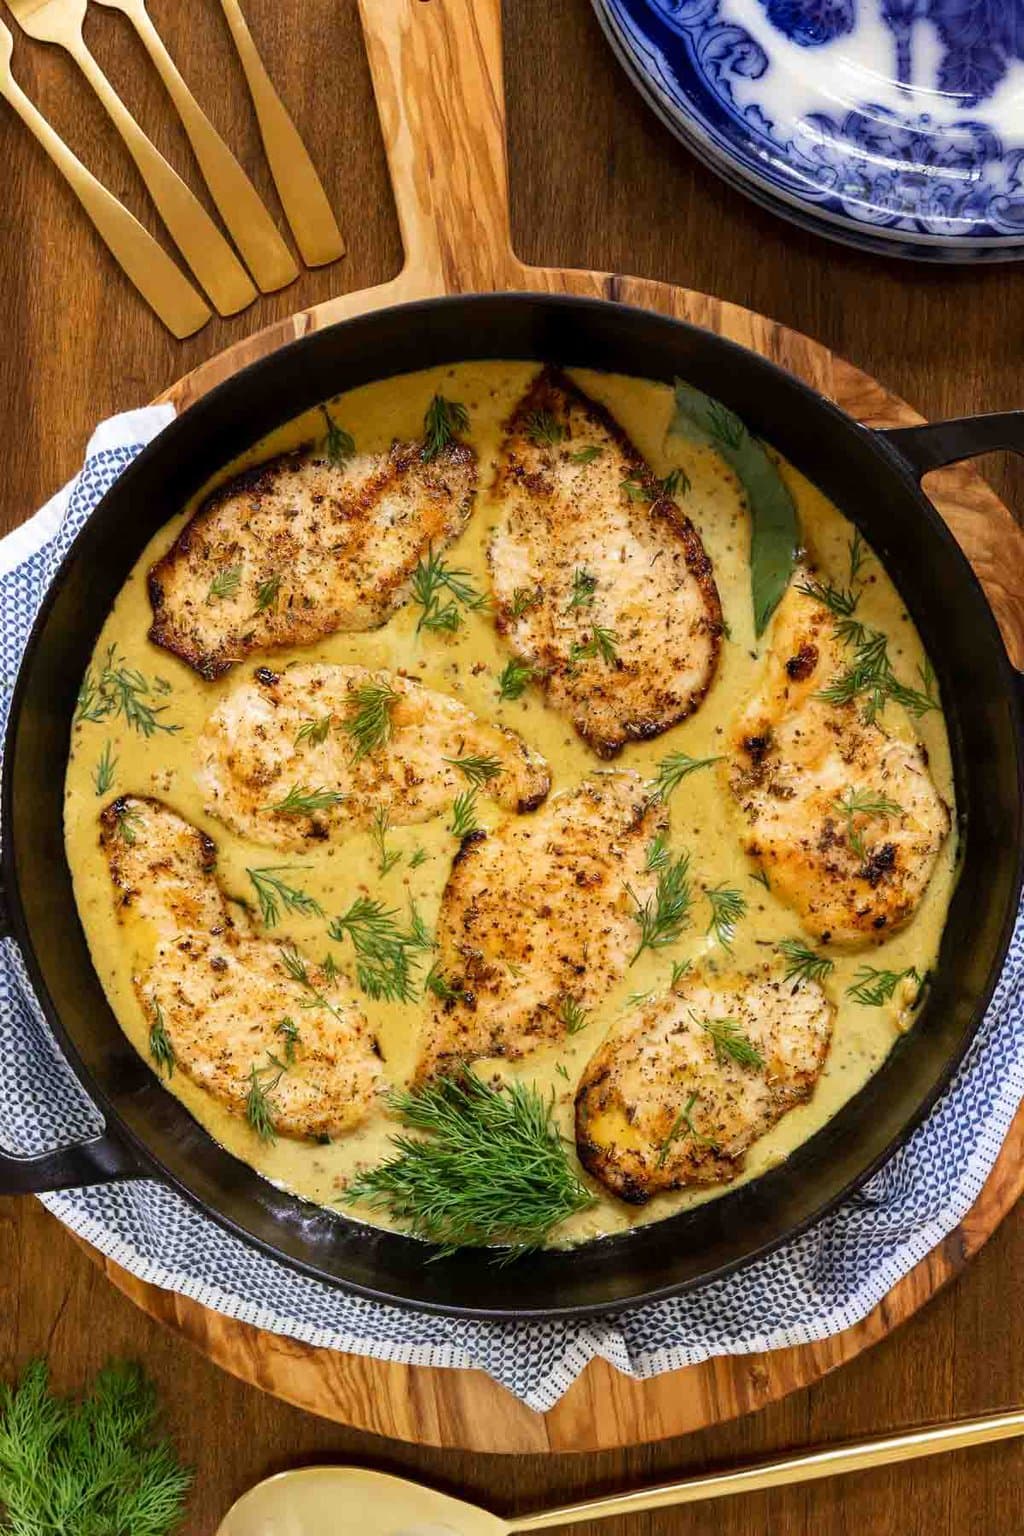 Vertical overhead photo of a skillet of French Mustard Chicken Breasts (Poulet à la Moutarde Française) on a wood table.